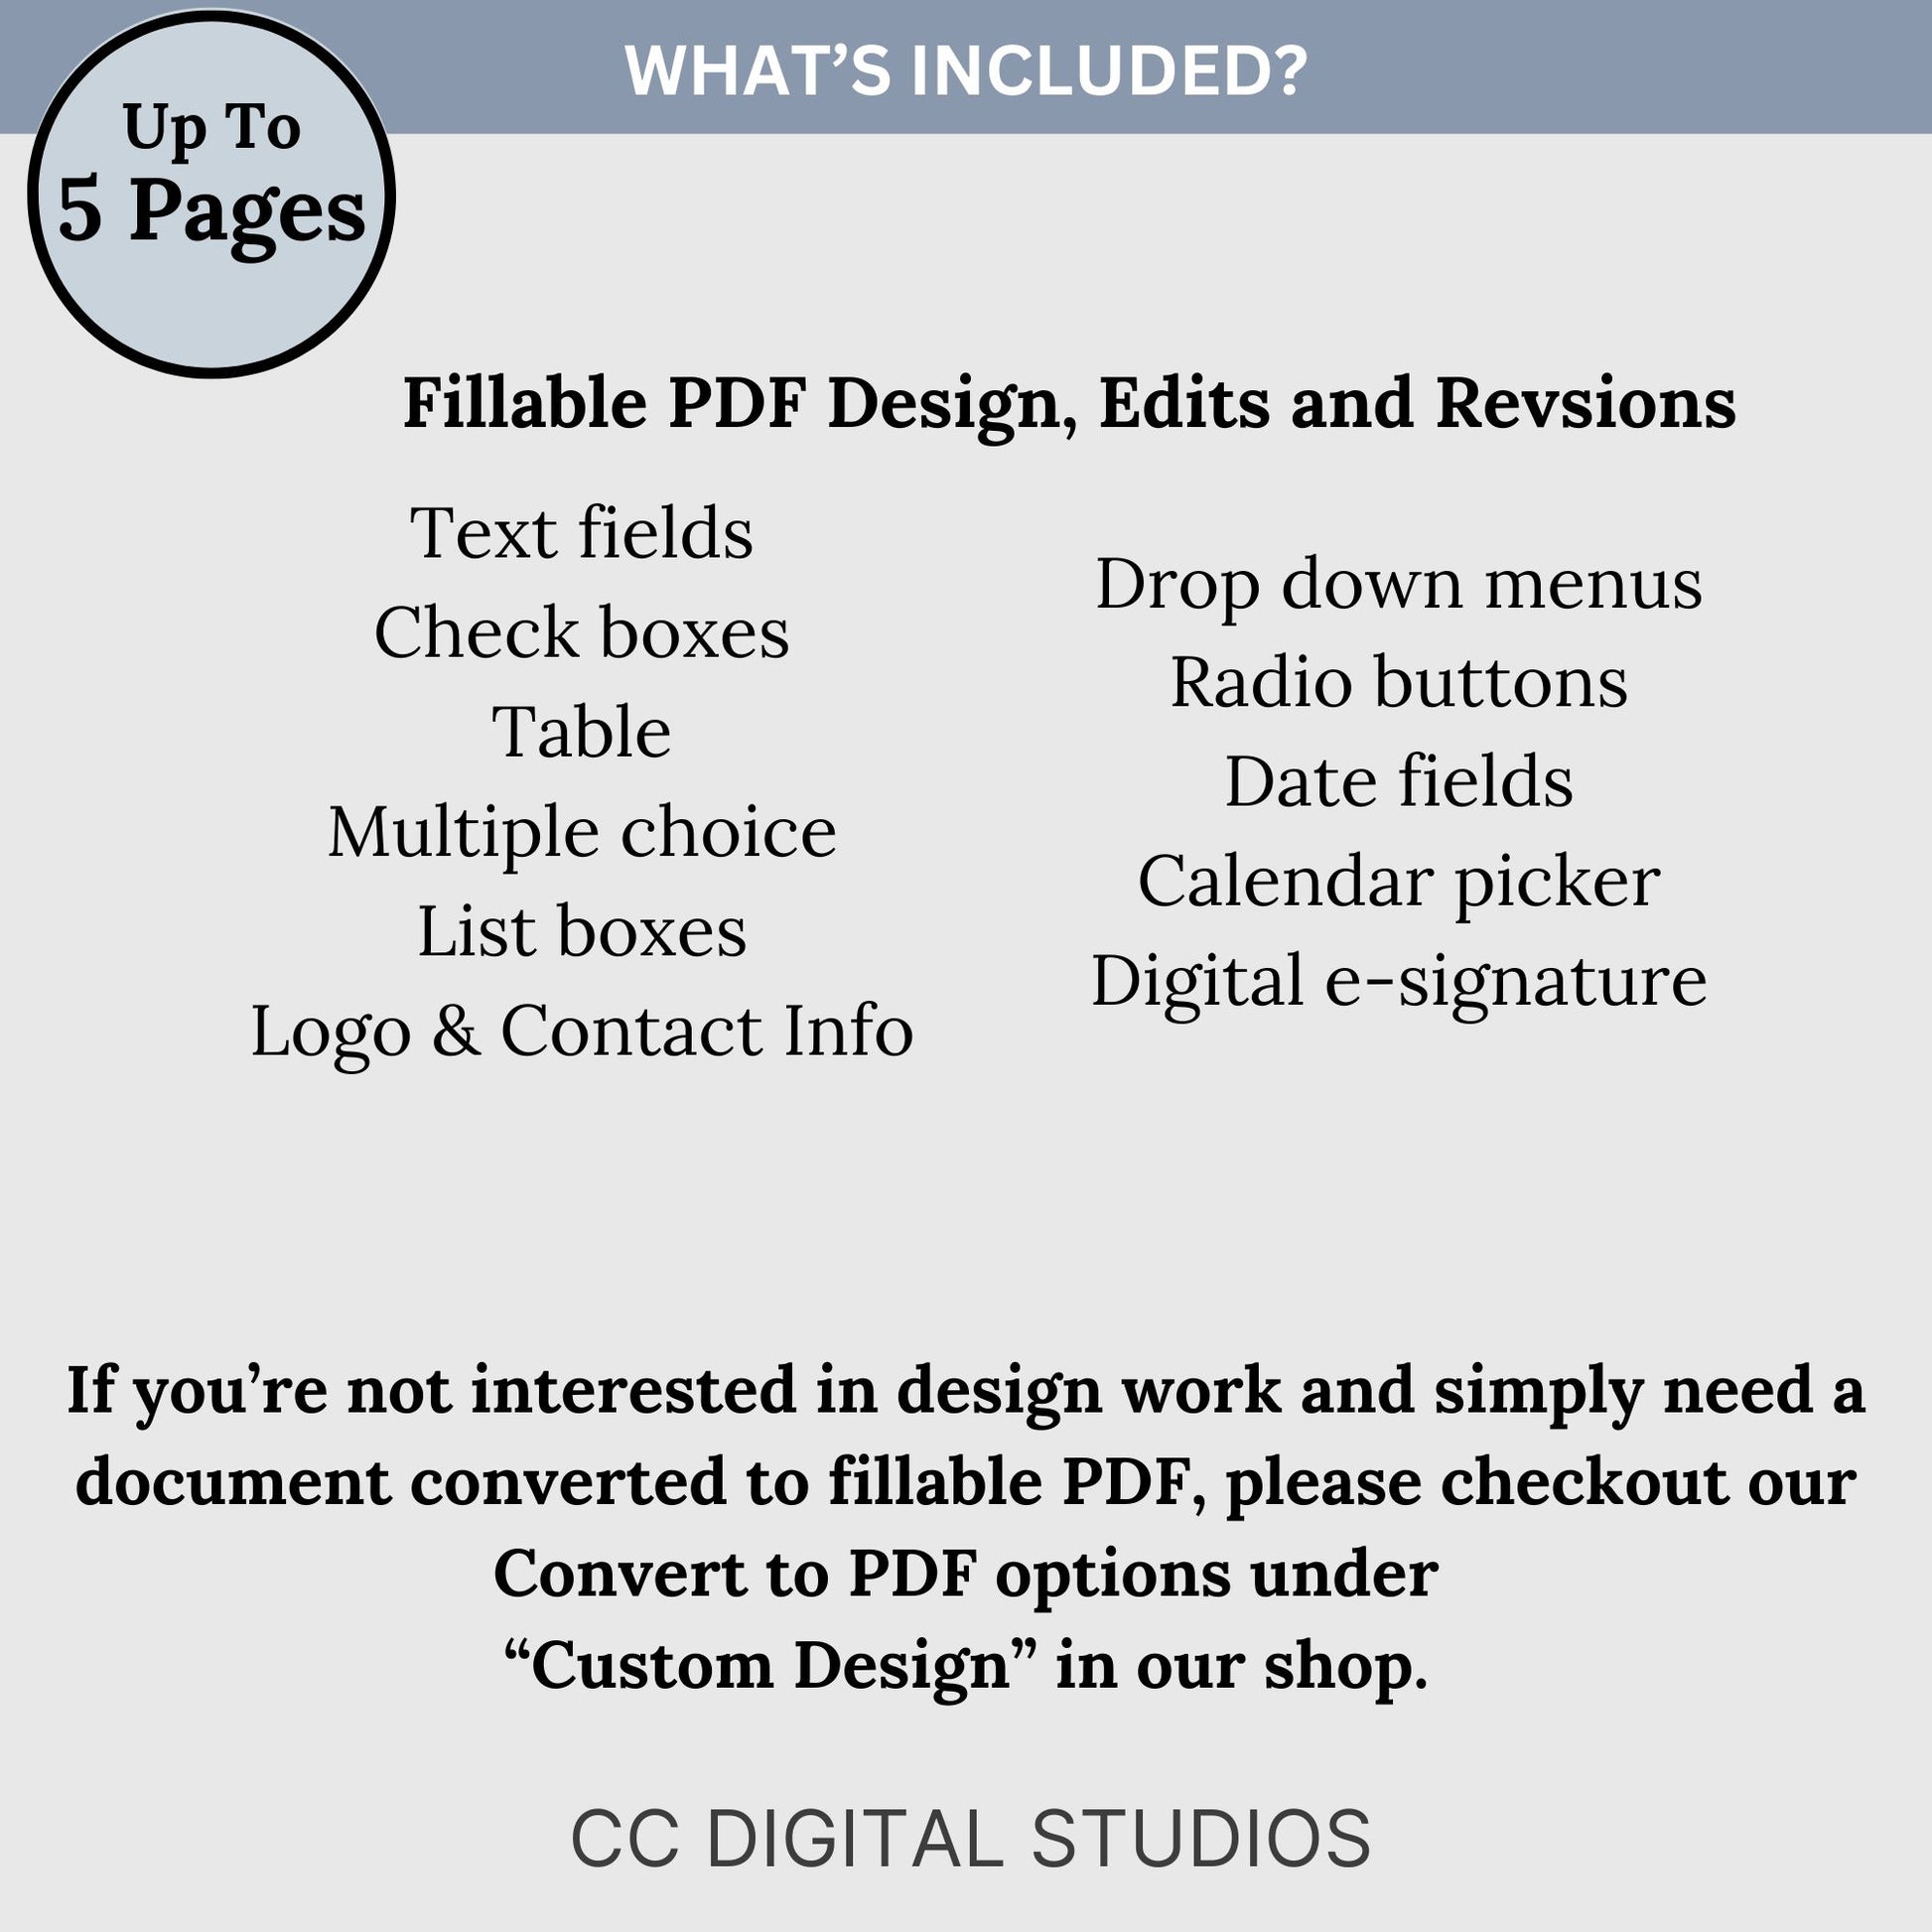 Standard PDF Design Package. Elevate your documents with professional design, edits, and revisions for up to 5 pages. Streamline your paperwork with fillable PDFs